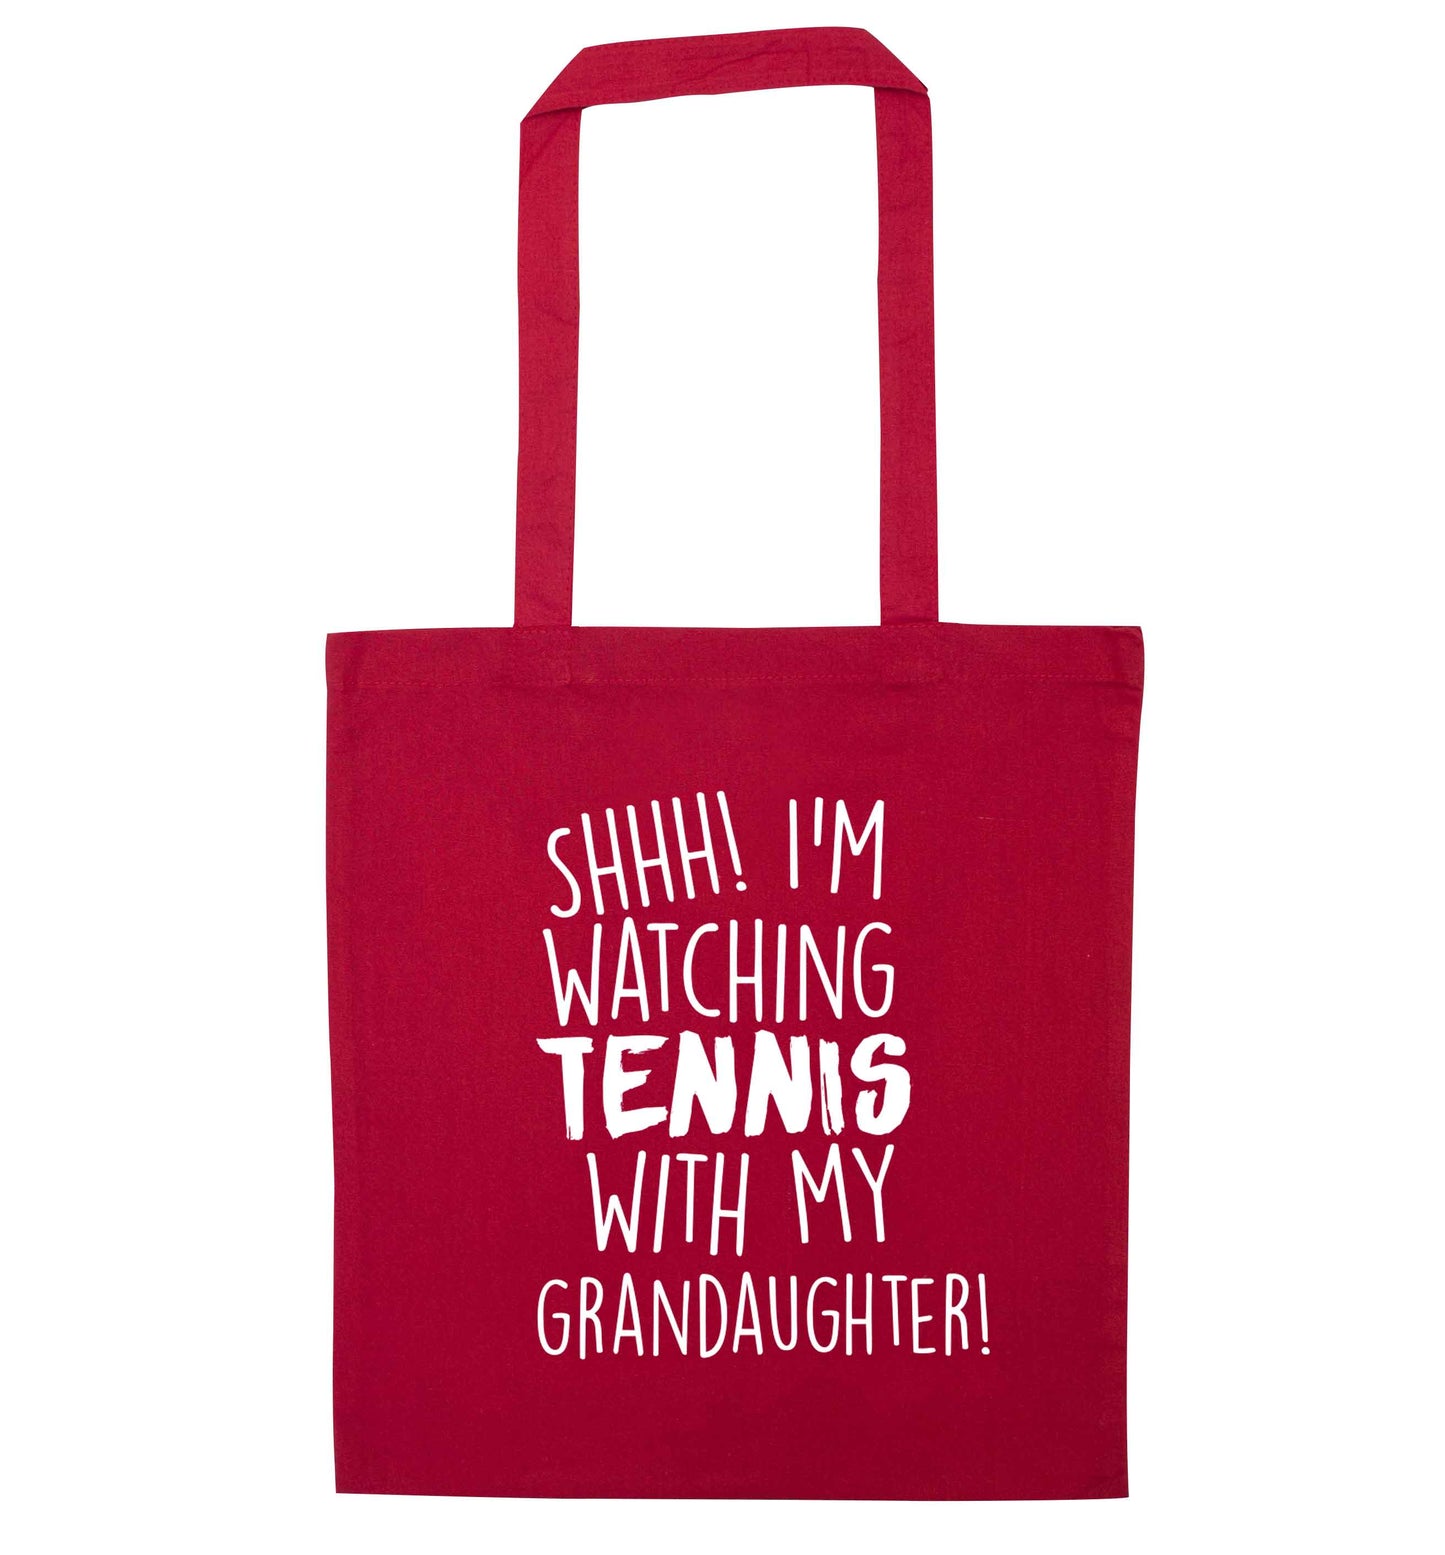 Shh! I'm watching tennis with my granddaughter! red tote bag